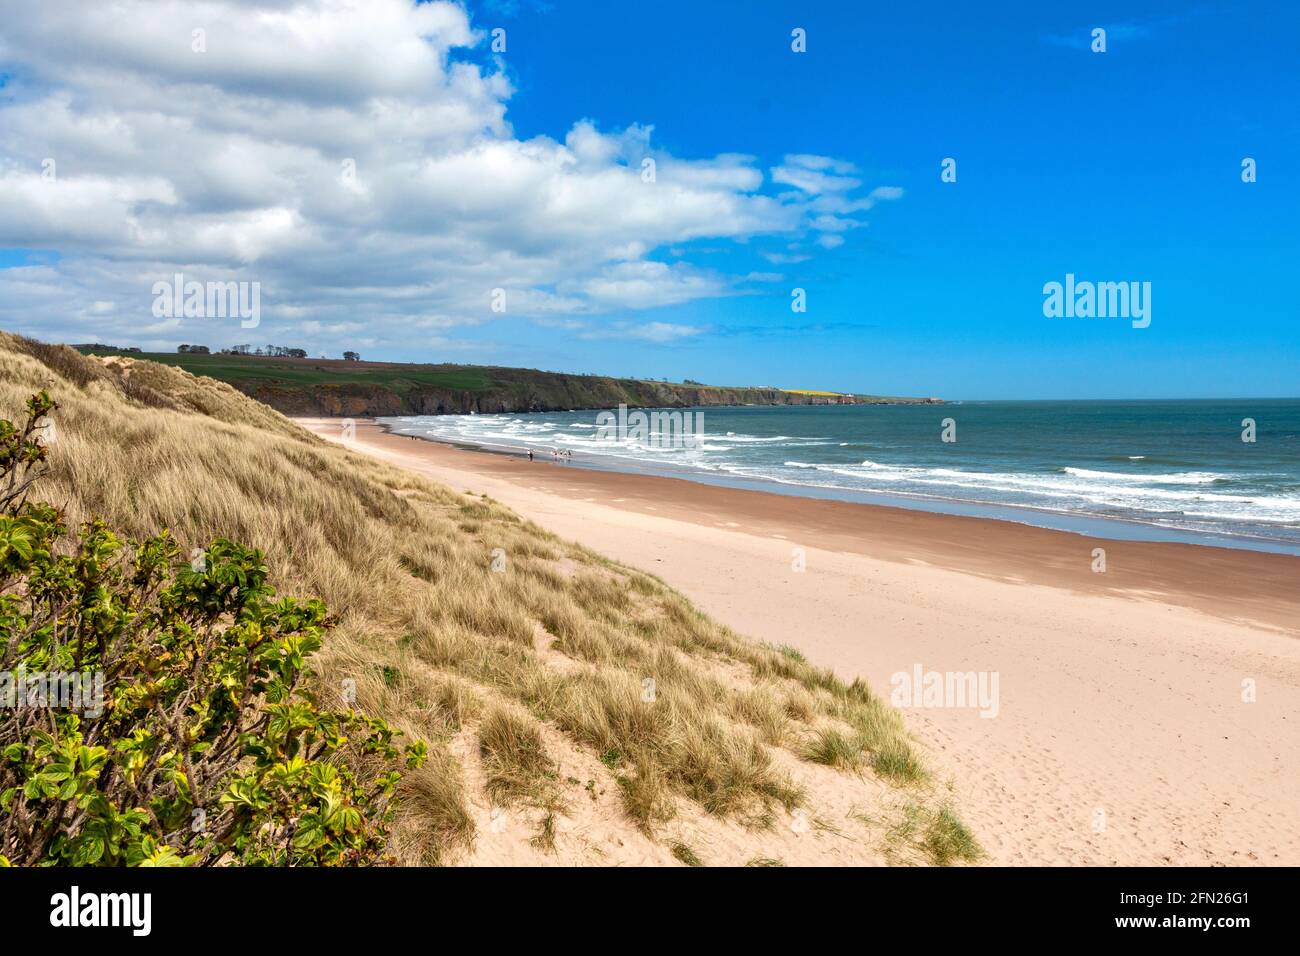 LUNAN BAY AND BEACH ANGUS SCOTLAND THE SWEEP OF THE BAY WITH SANDY BEACH AND PEOPLE IN THE BLUE SEA Stock Photo